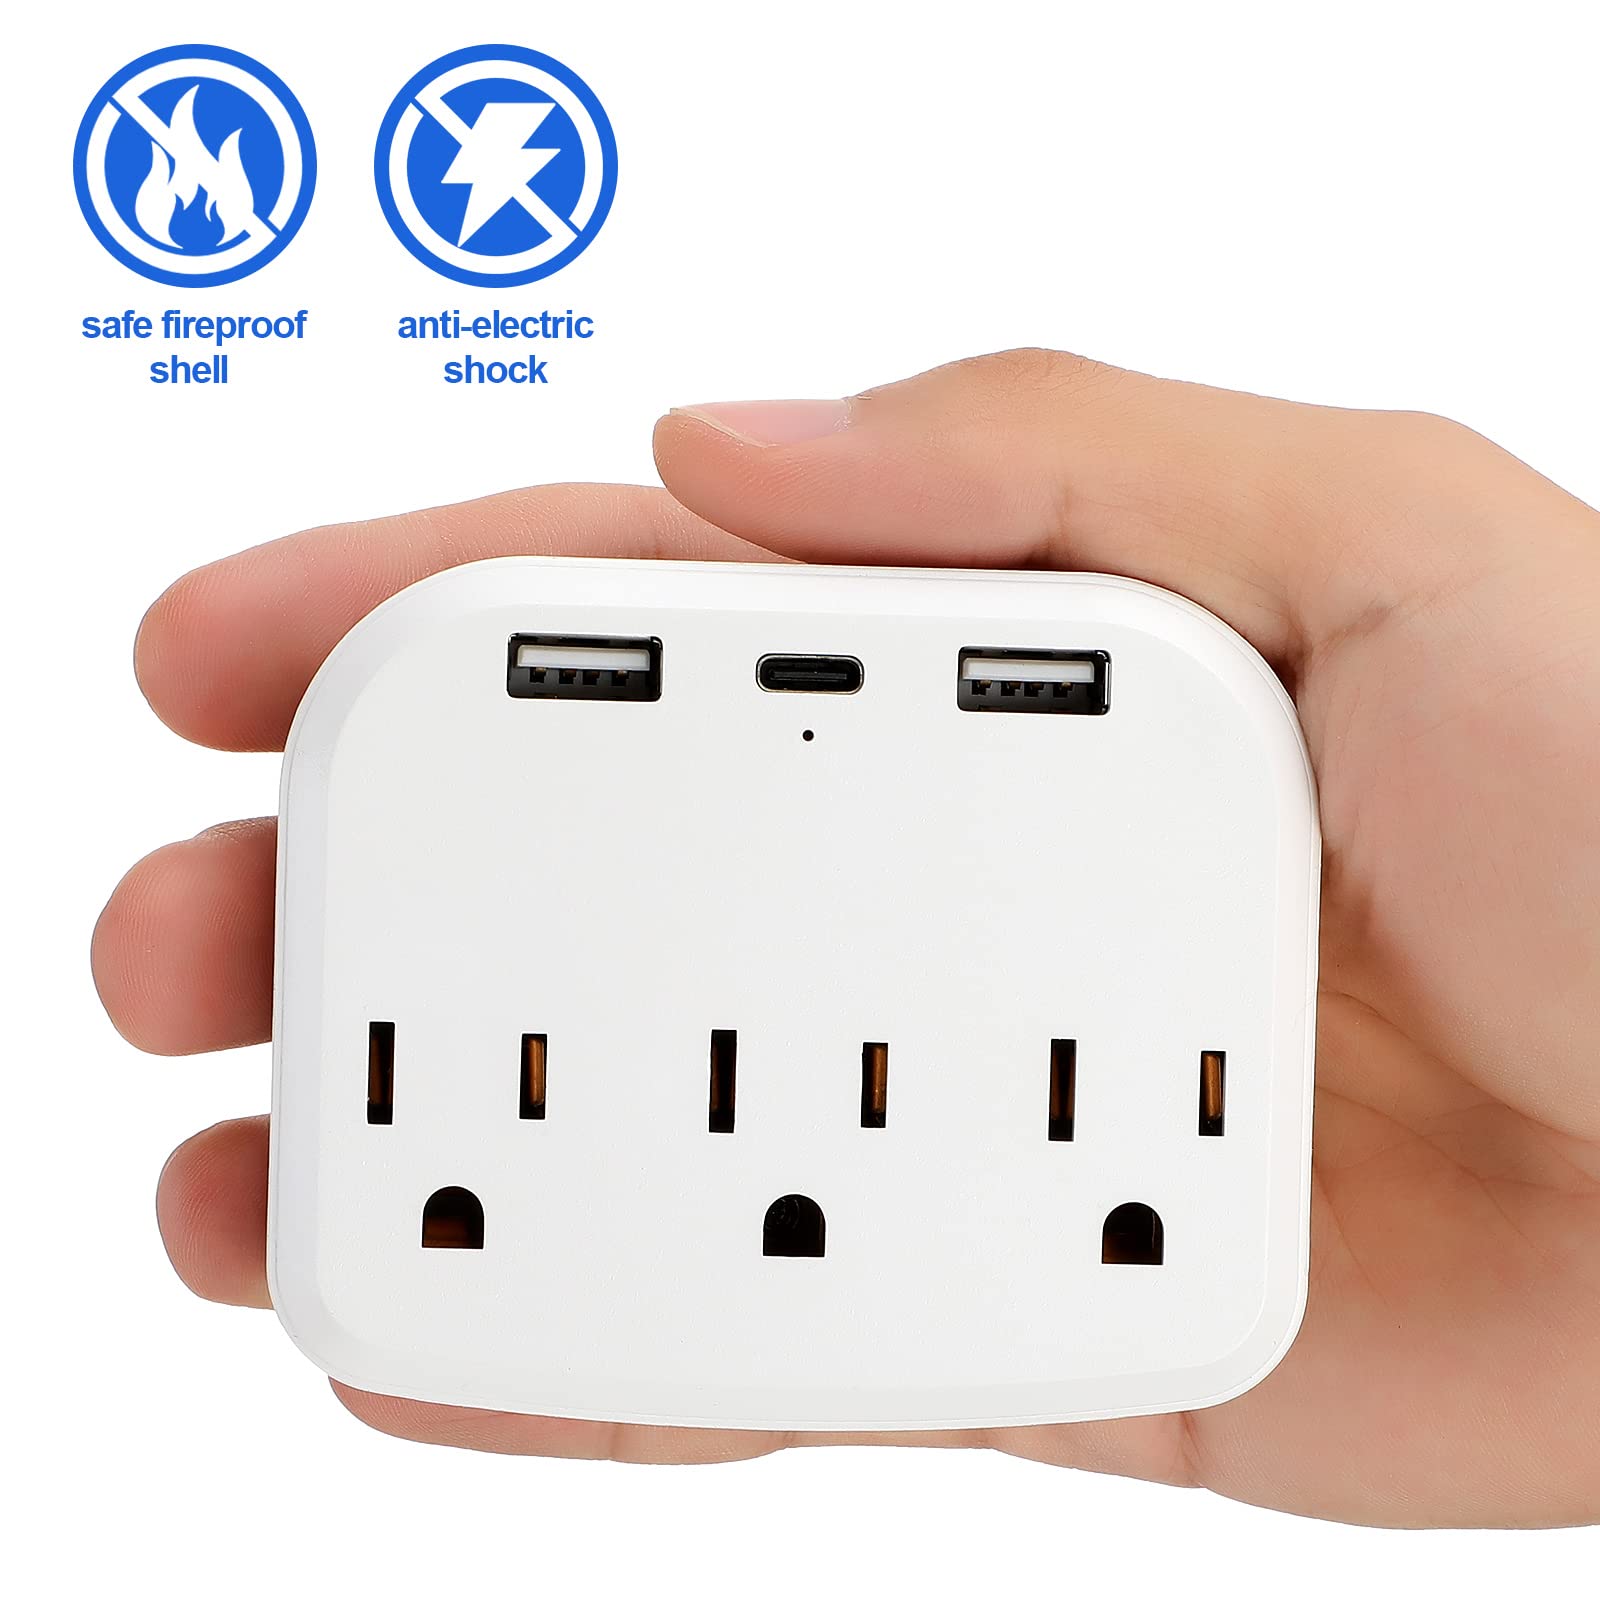 Cruise Power Strip Cruise Essentials Non Surge Protection Outlet Extender with USB Outlets Ports Portable Travel Adapter Multiple Plug for Cruise Ship, Home, Office, White